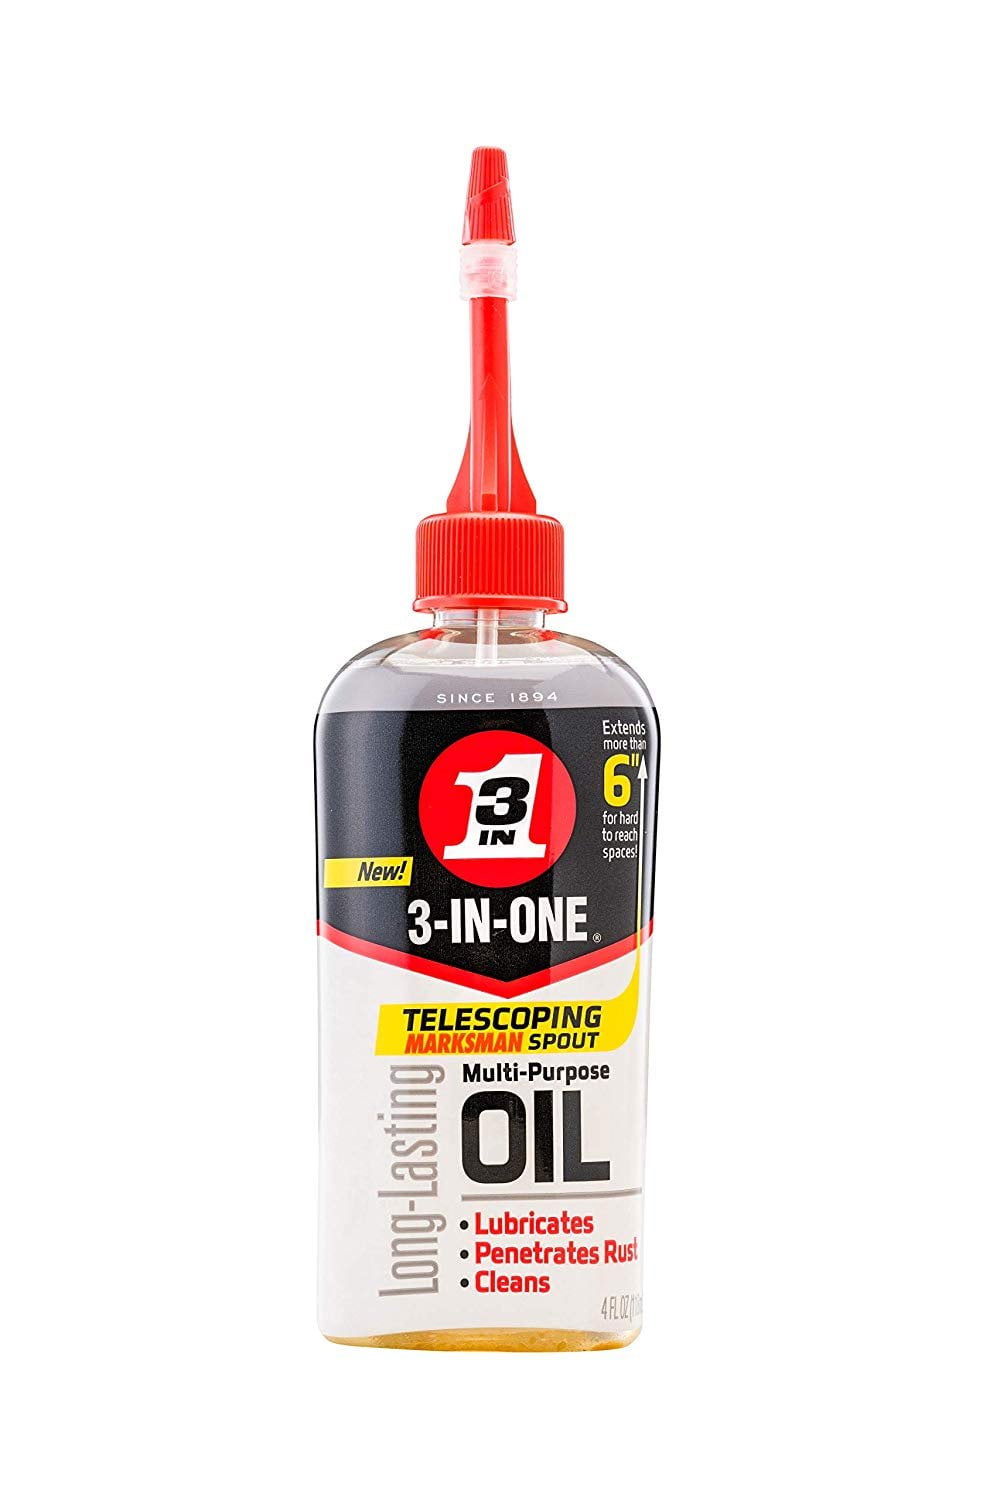 3-IN-ONE Multi-Purpose Oil with Telescoping Marksman Spout, 4 OZ Telescoping Tubes Car Oil